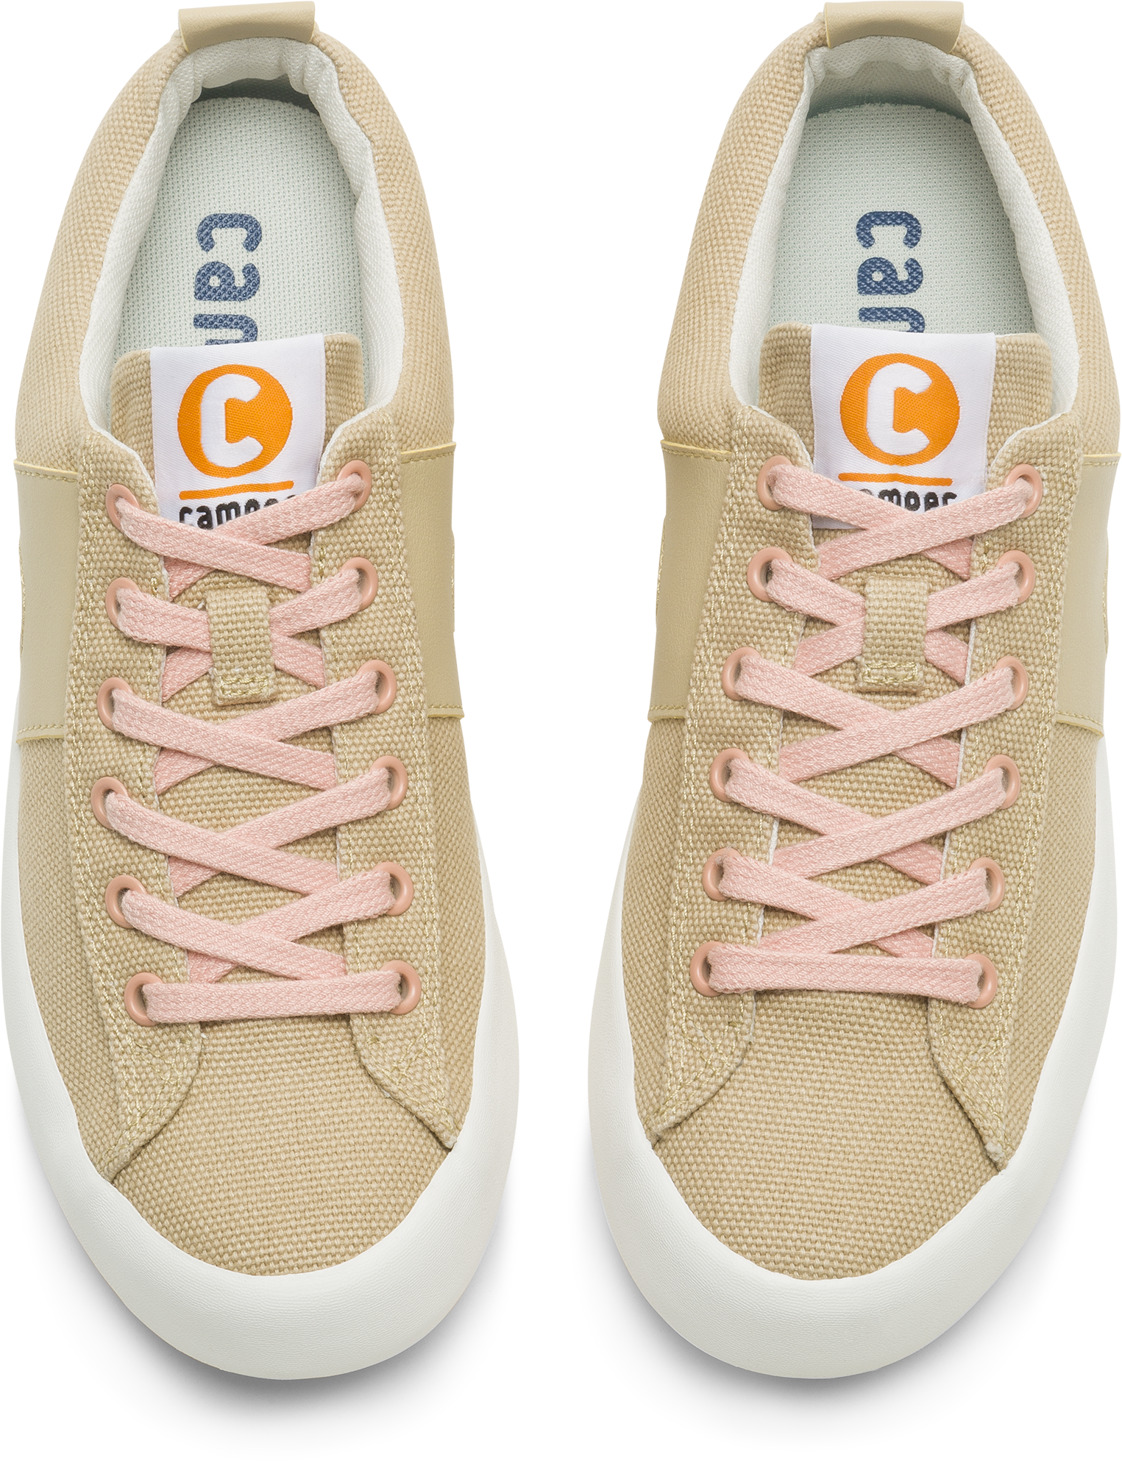 Imar Beige Sneakers for Women - Fall/Winter collection - Camper USA